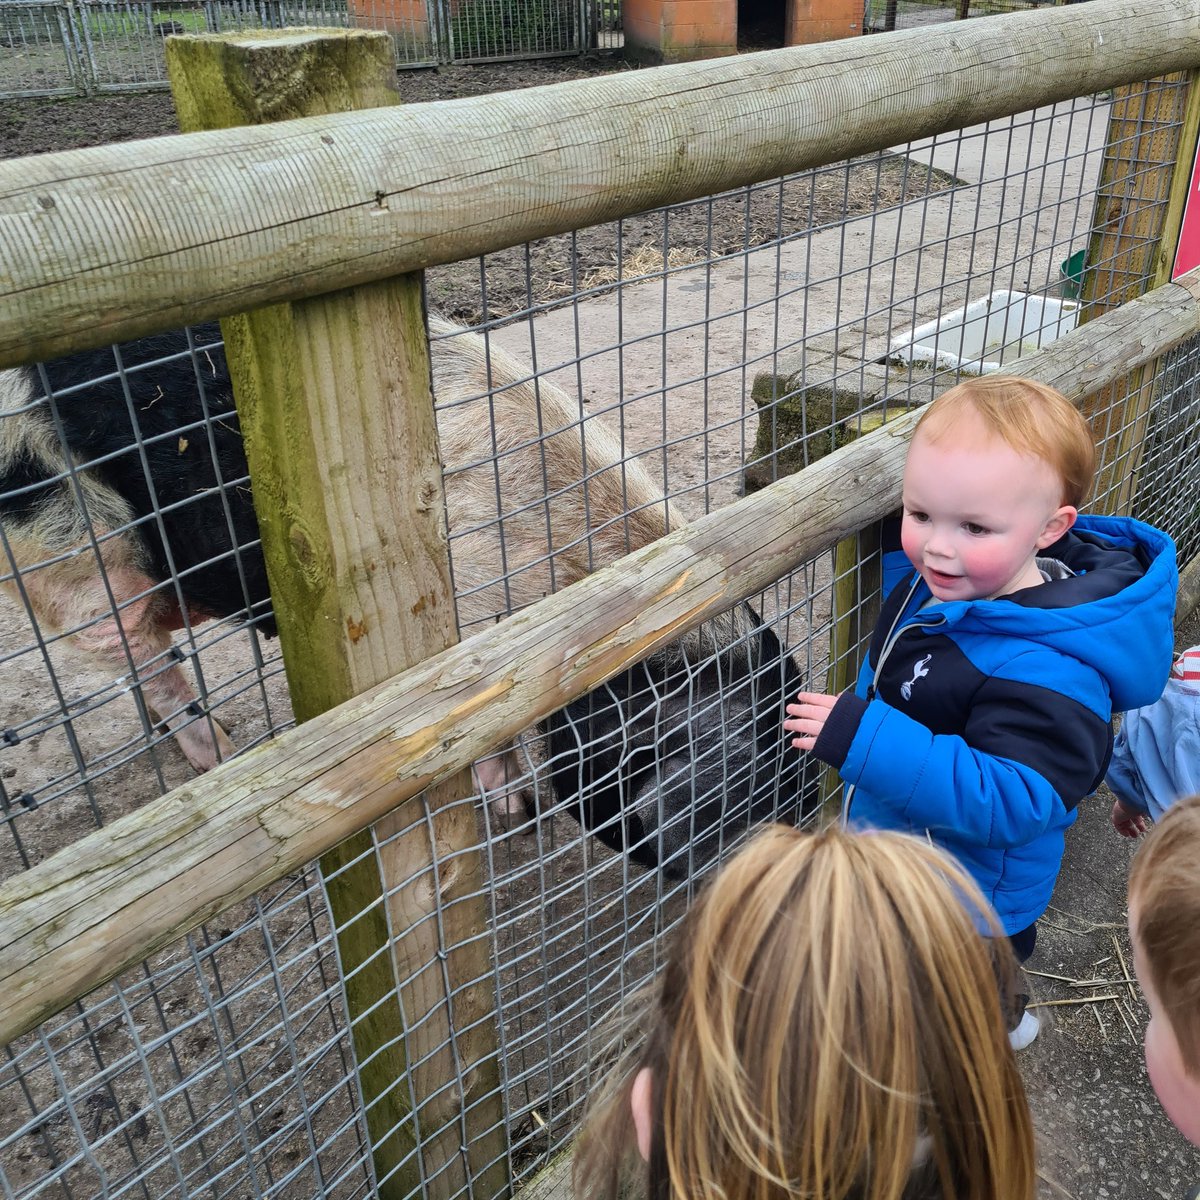 Harry had an amazing day today at Acorn Farm with his Nursery Class friends. He loved petting the animals and feeding them too. Lot's of special memories made today 🩵 @MissWarbrick_ @Mrs_Gittens @RebeccaAshbroo2 @parishschool1